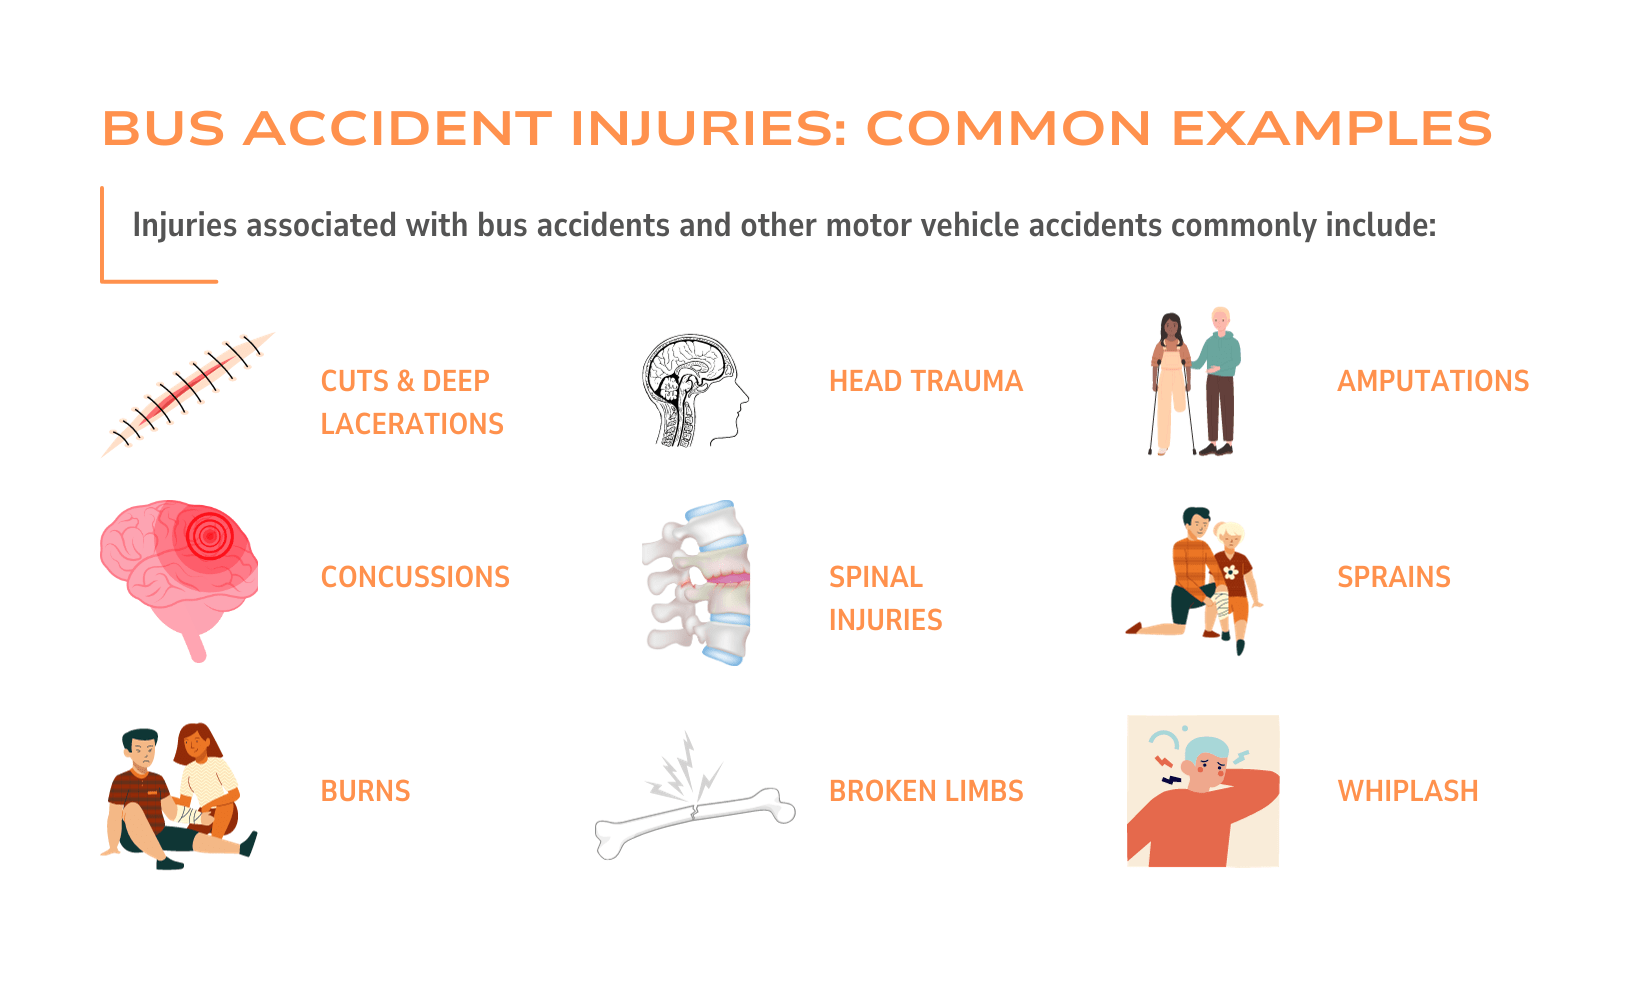 Bus Accident Injuries: Common Examples Infographic